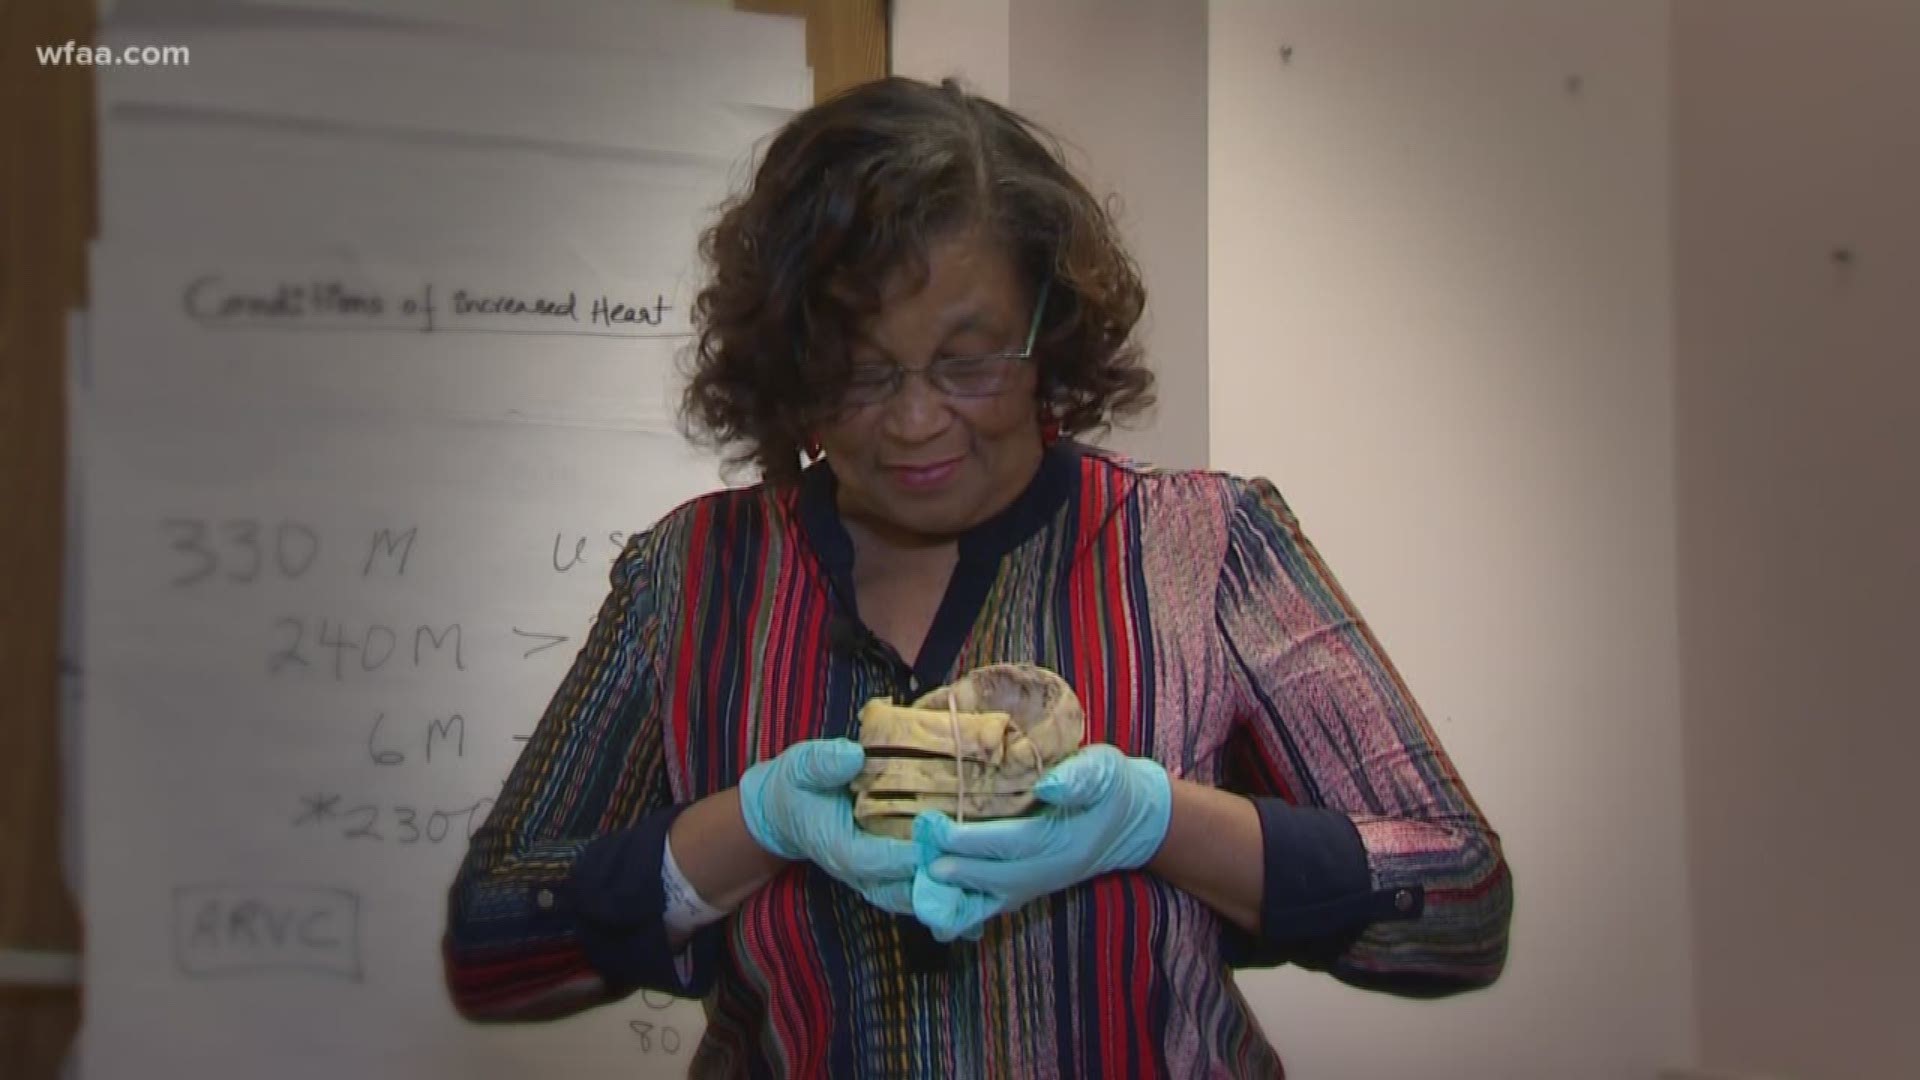 She battled heart disease for years. Now that she's recovering from a heart transplant, she got to hold her old heart.